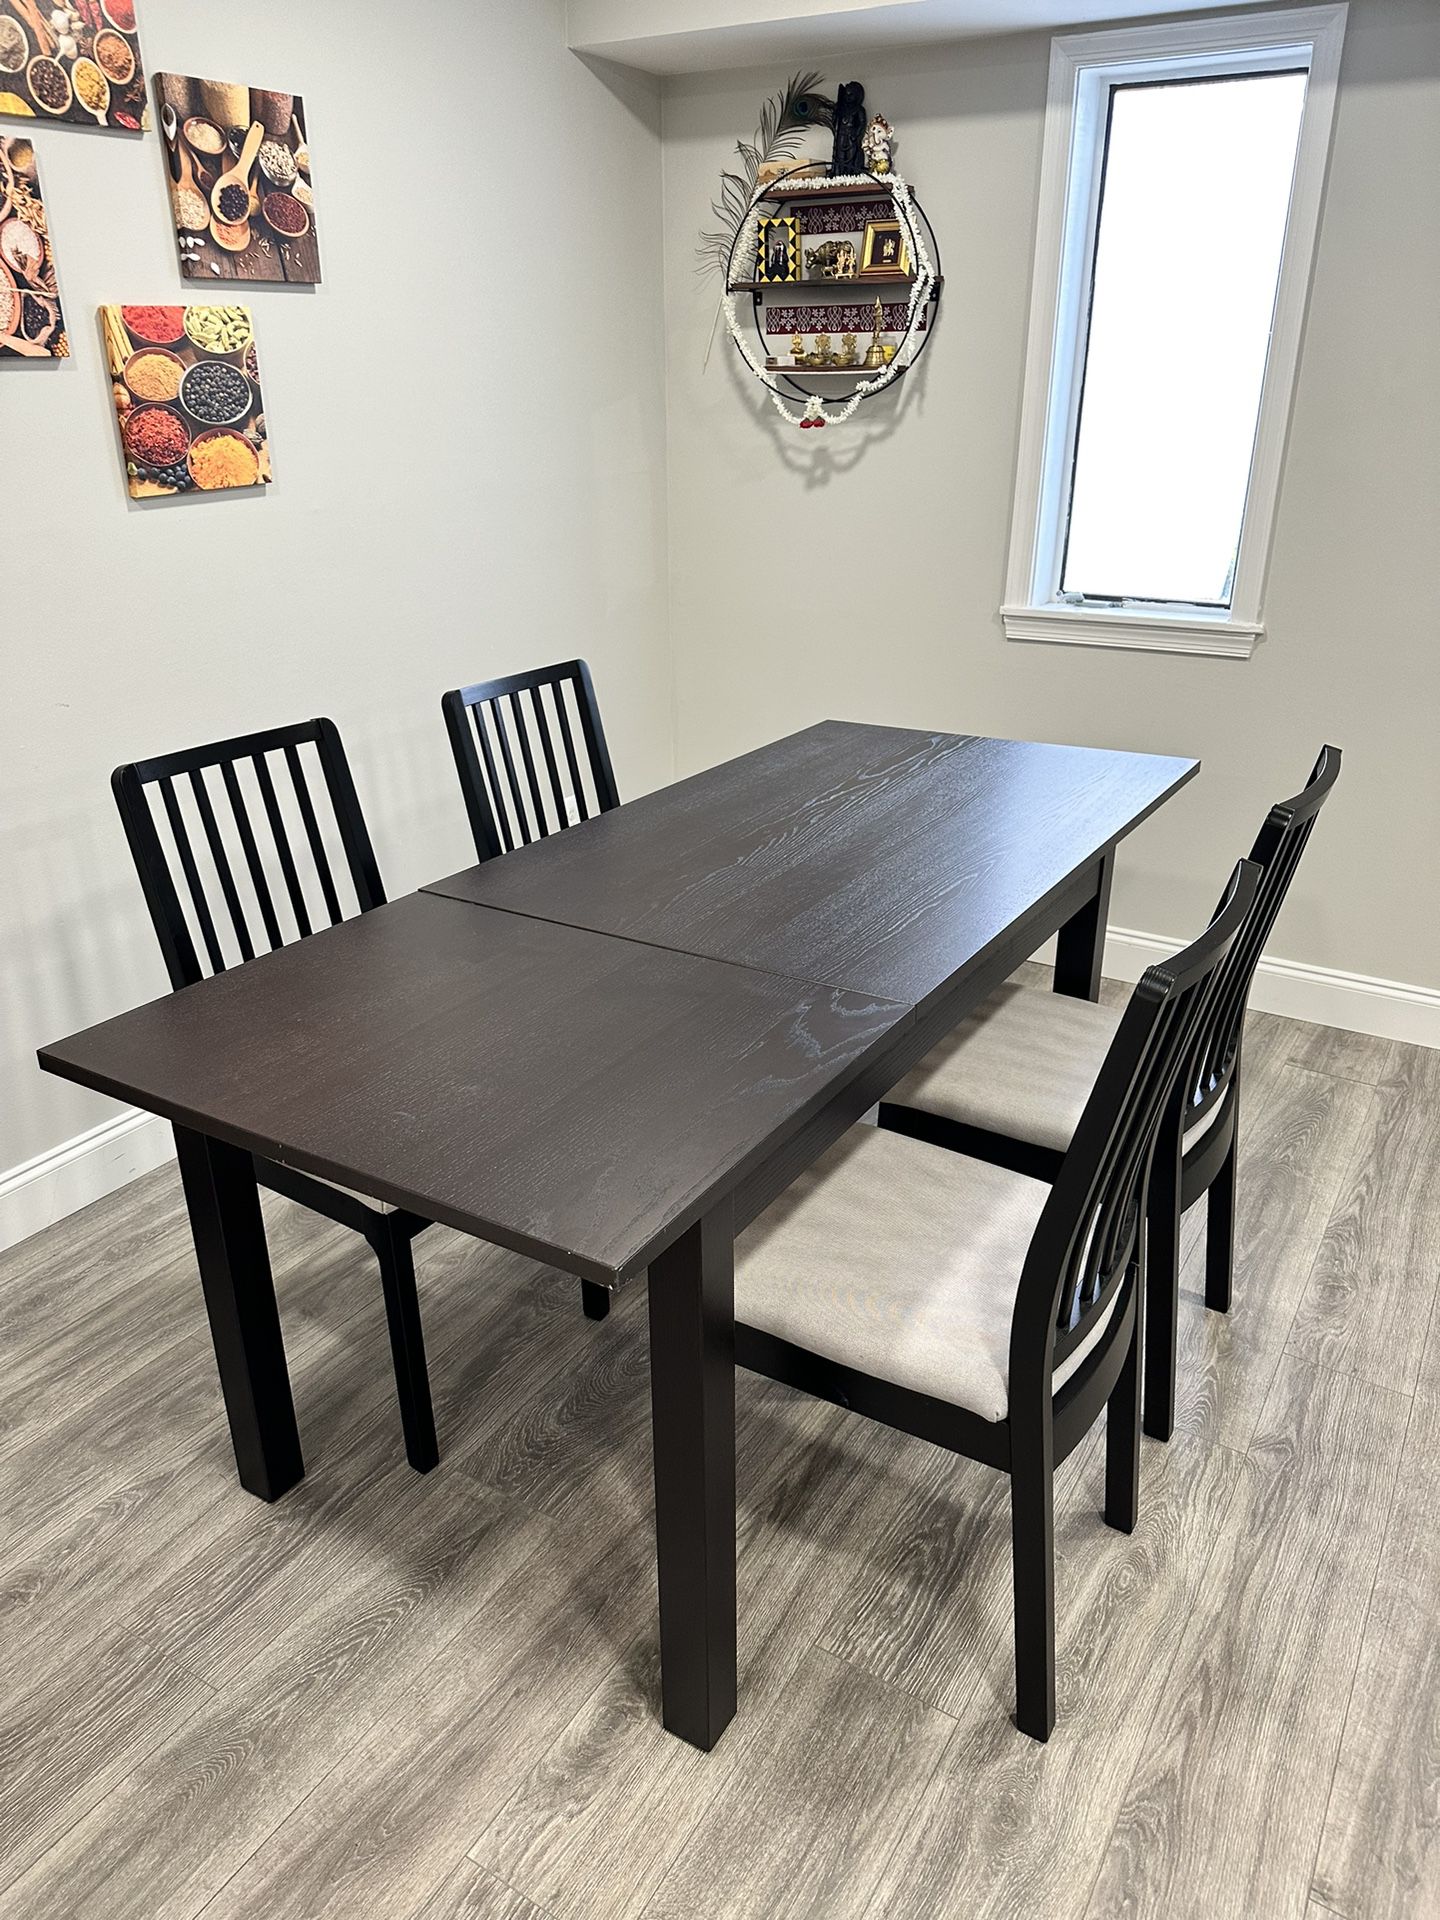 Dining Table And Chairs (IKEA) 